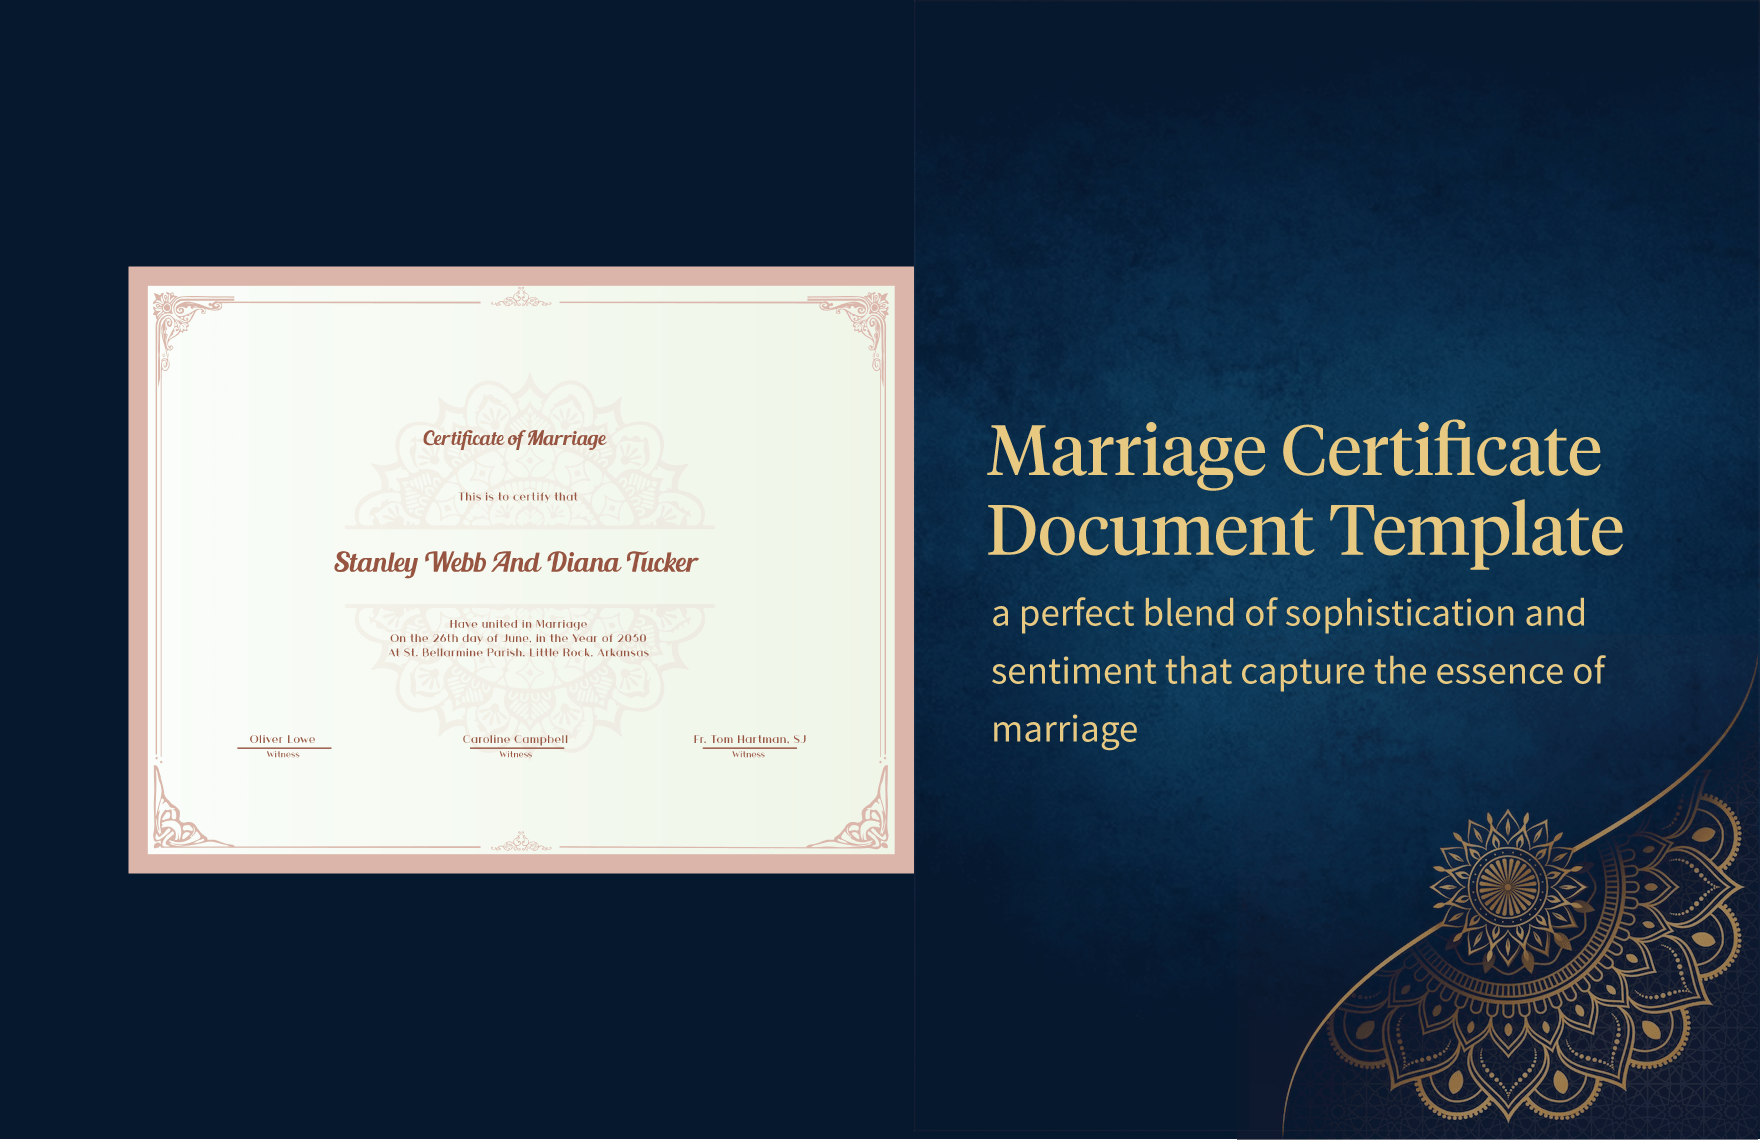 Marriage Certificate Document Template